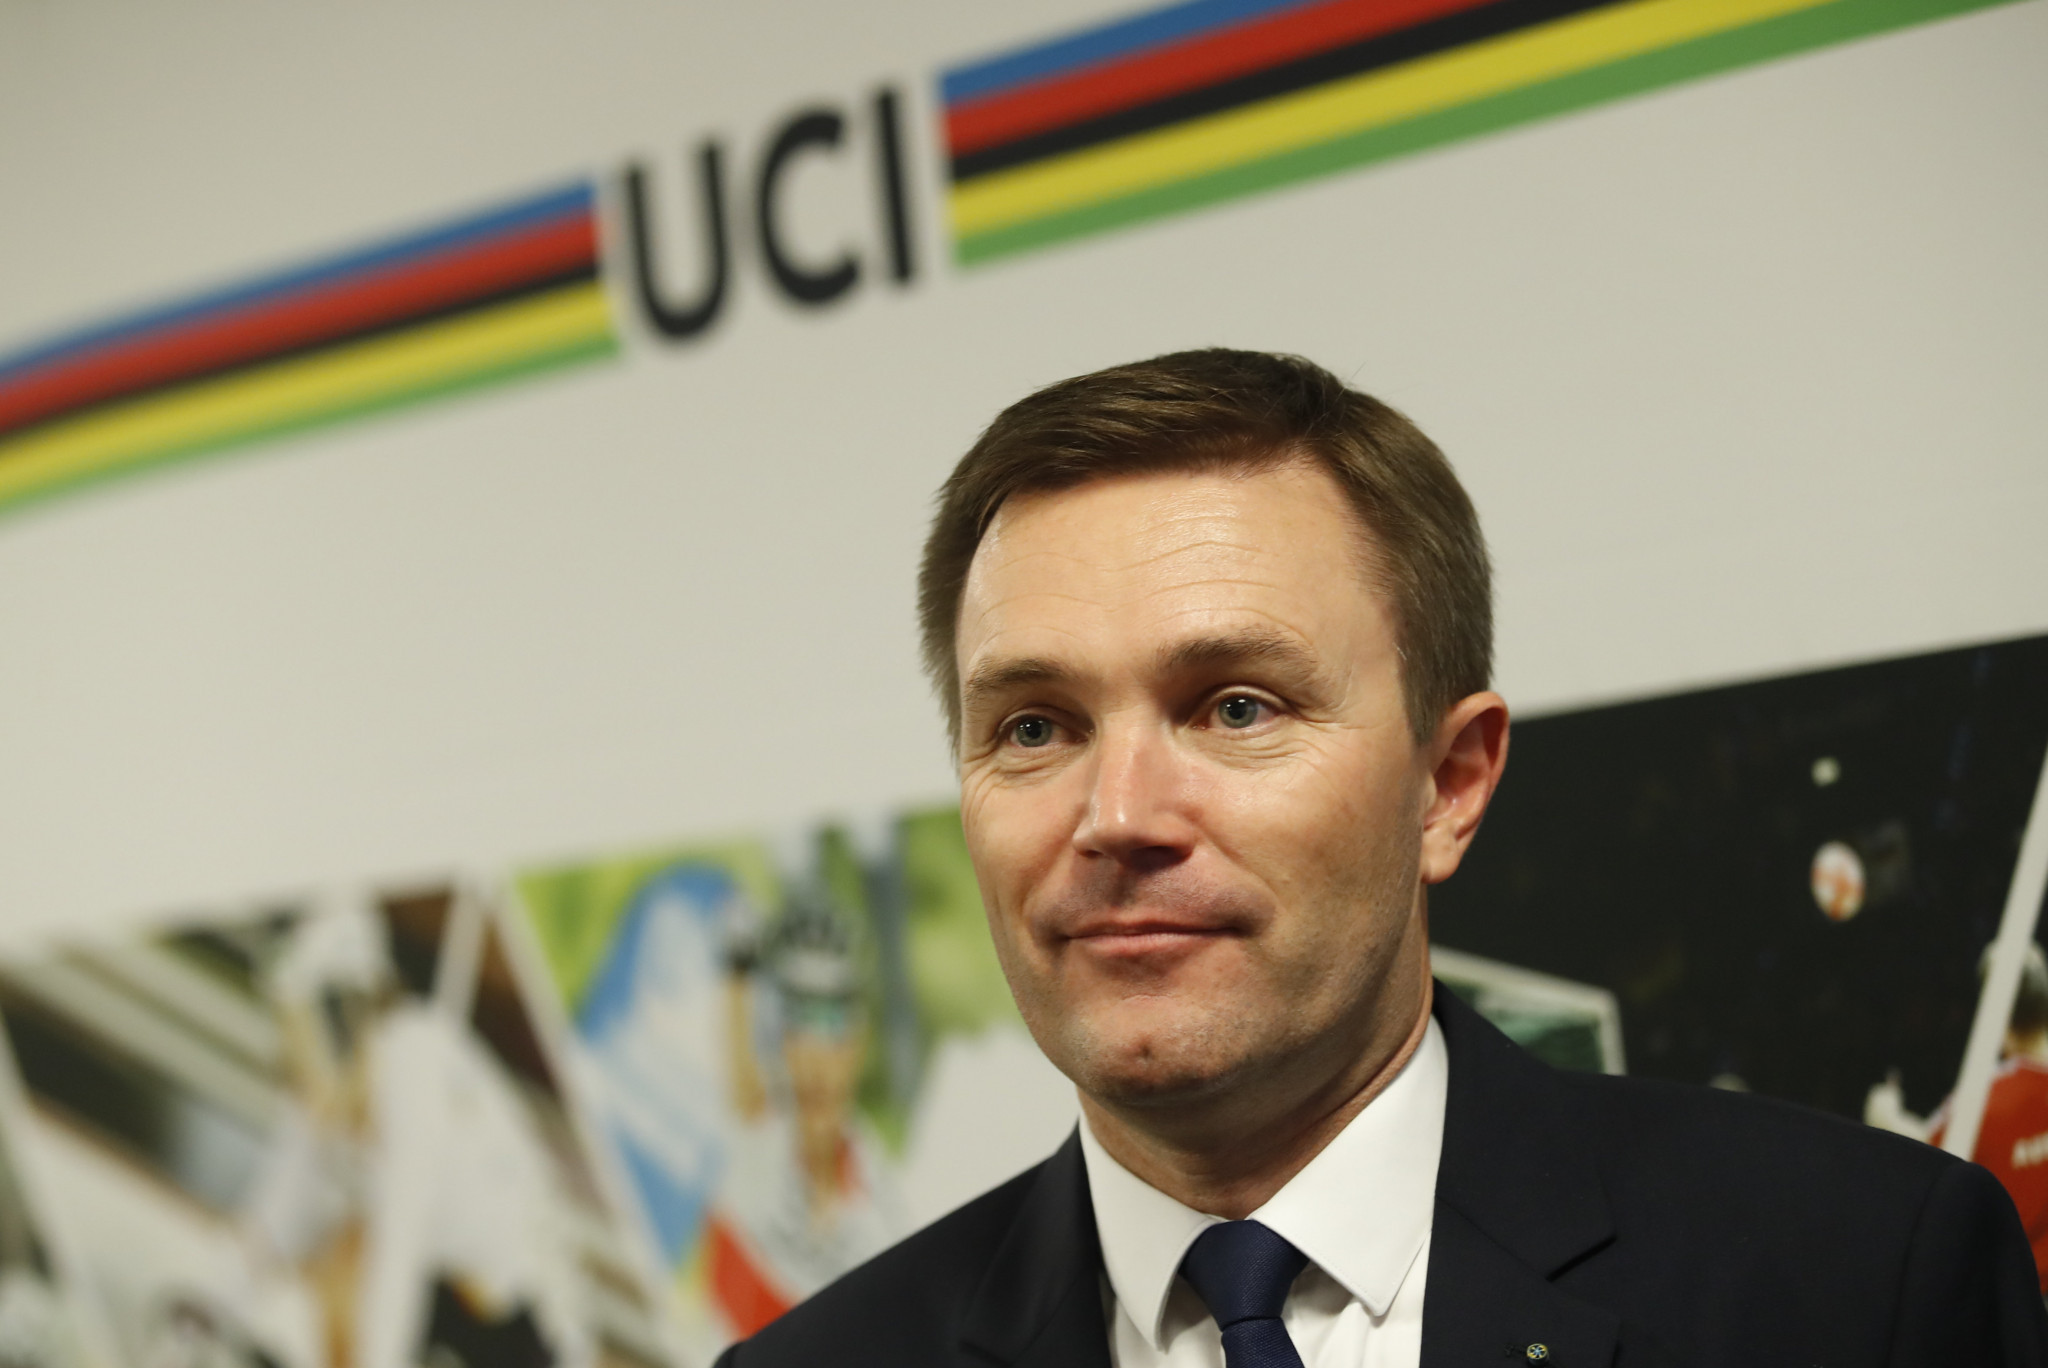 David Lappartient is in favour of not extending the season "beyond what is reasonable" when cycling returns ©Getty Images